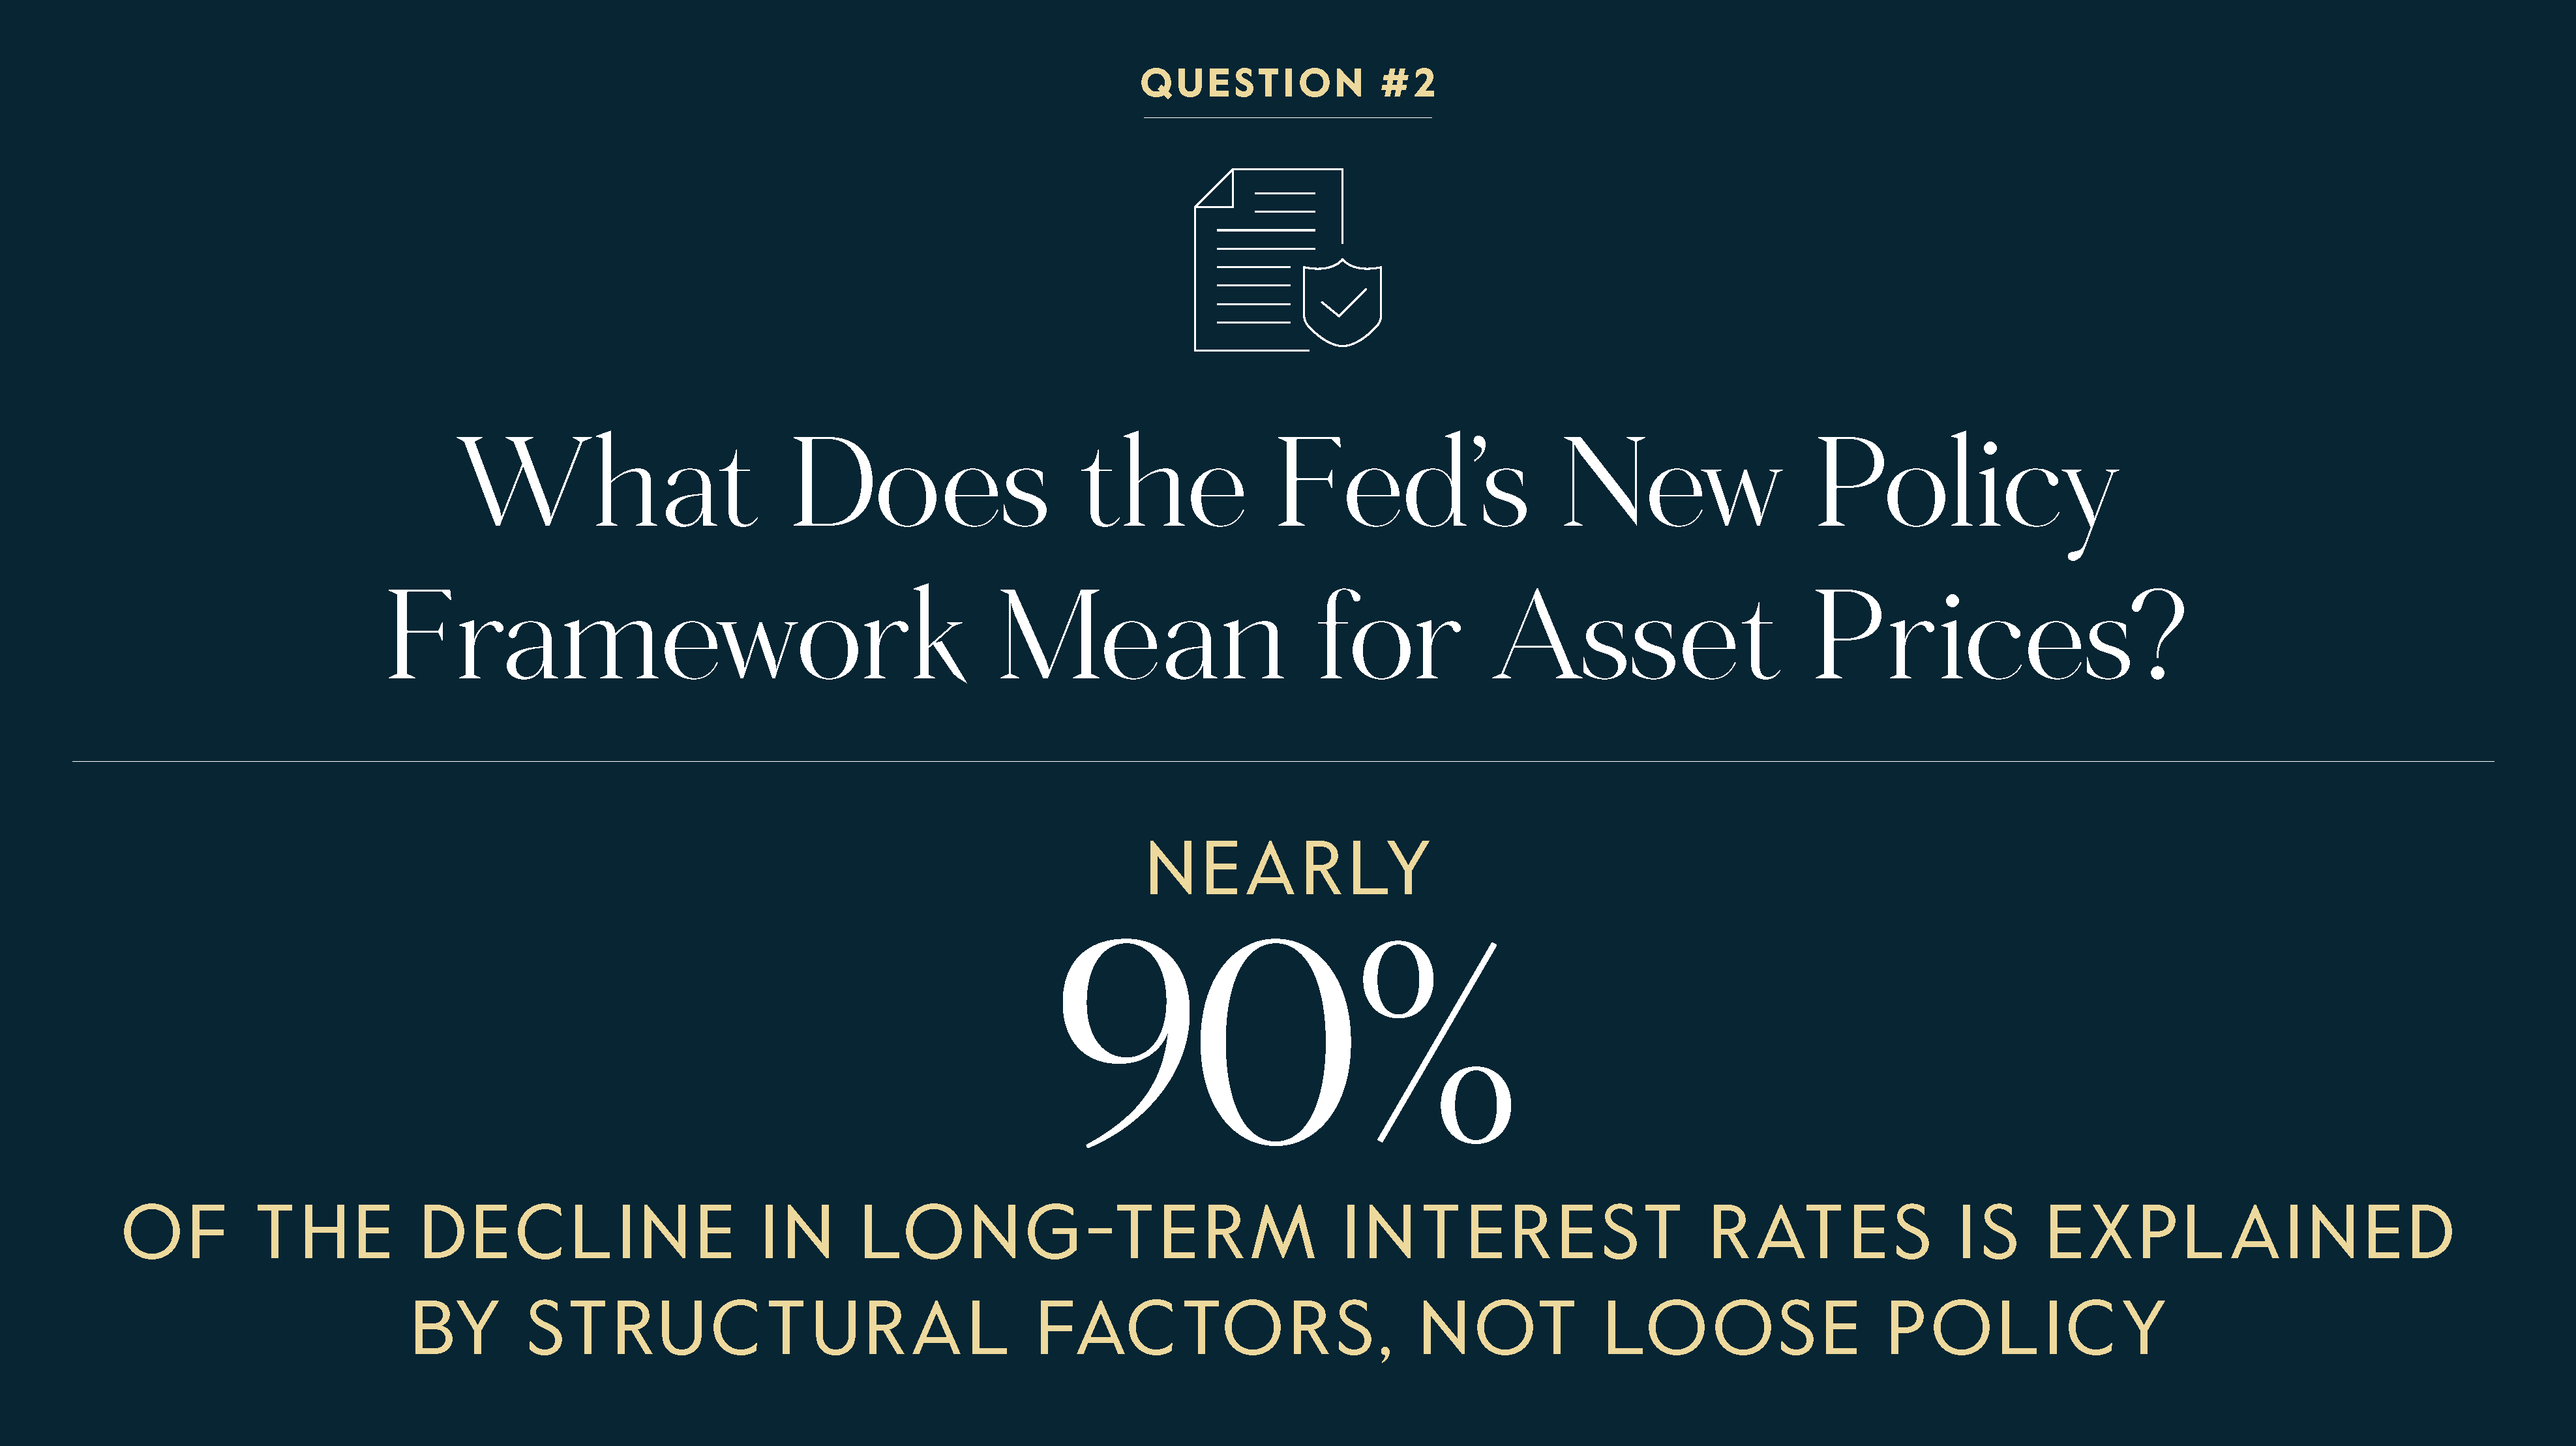 What does the Fed's new policy framework mean asset prices?